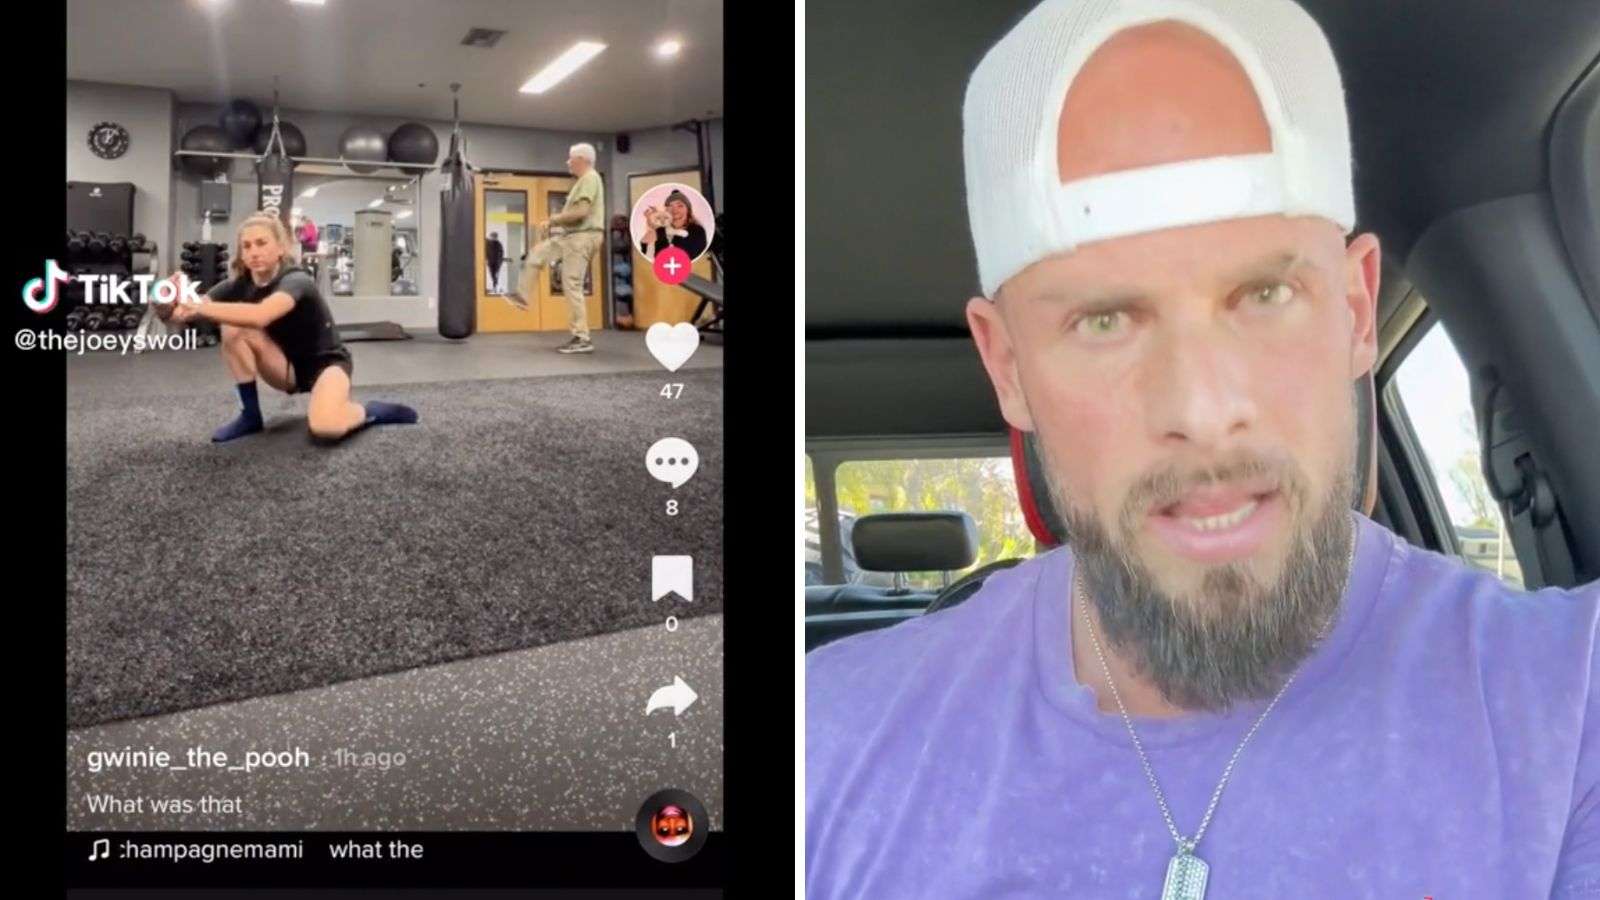 TikToker deletes account after being called out by Joey Swoll for old man at gym video